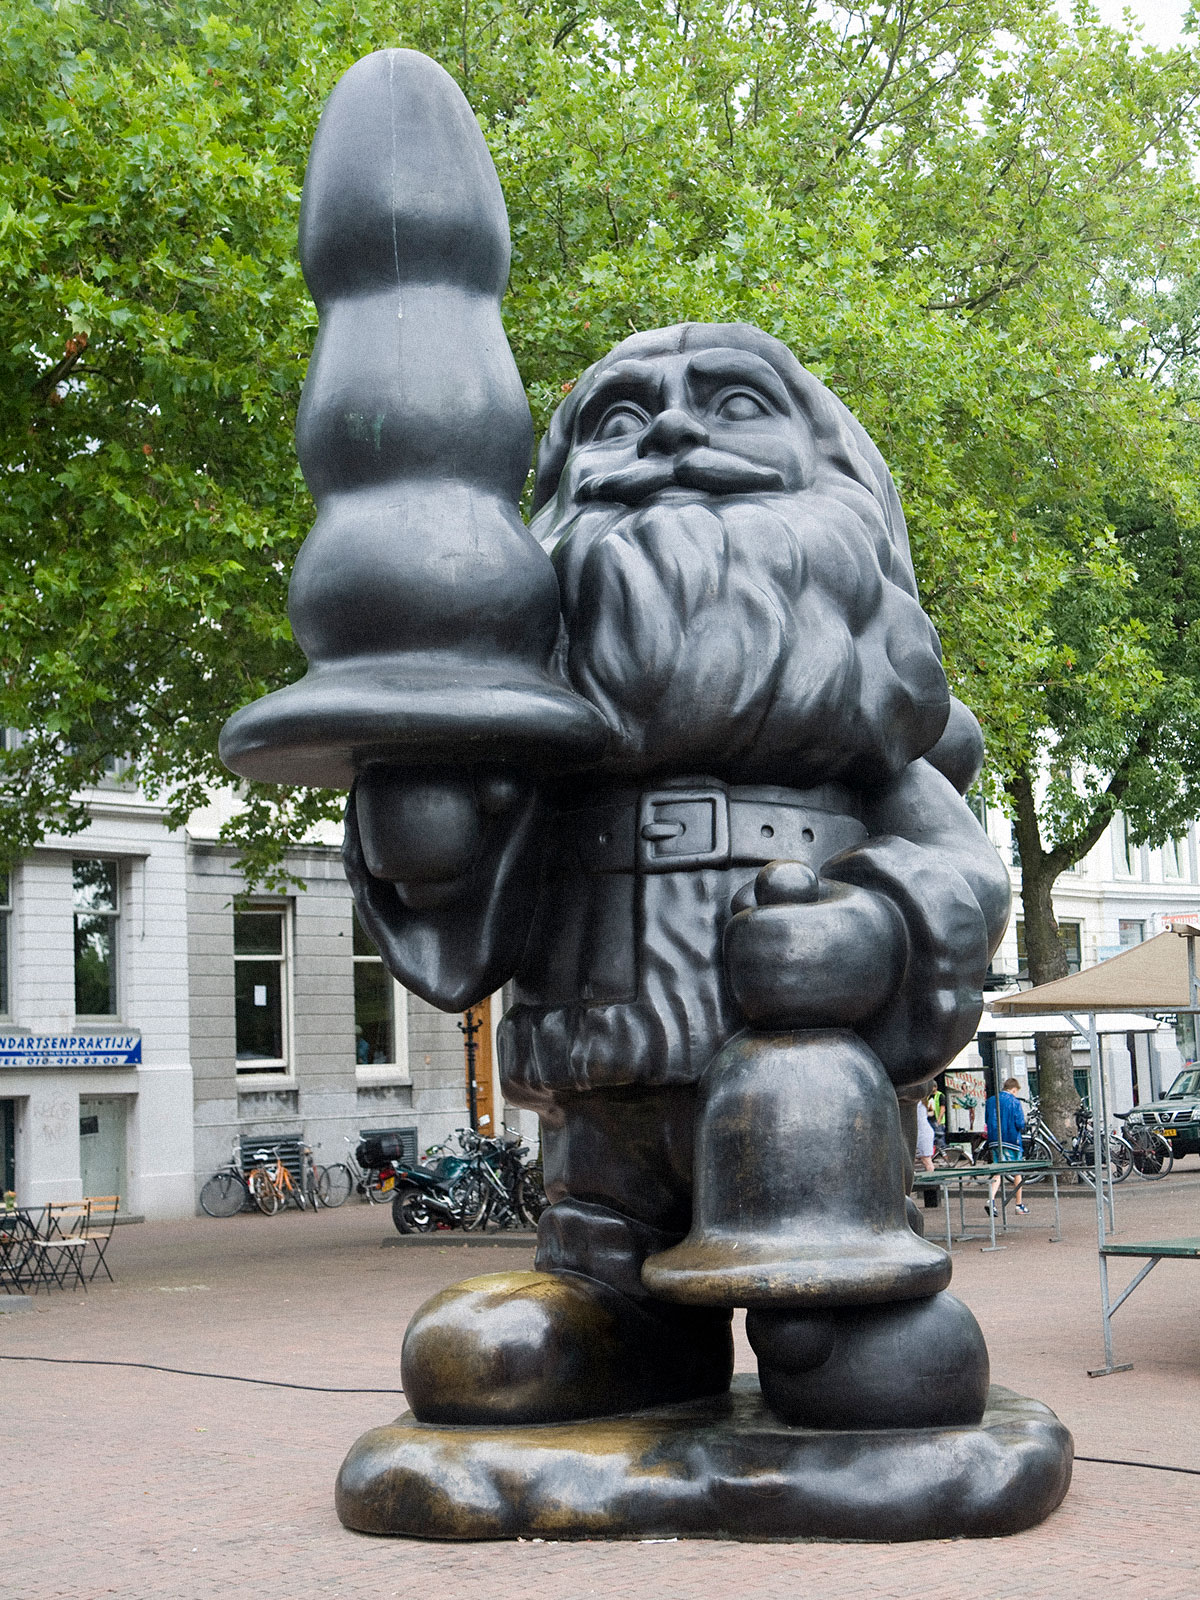 Santa Claus with Butt plug sculpture, by Paul McCarthy created 2001 Rotterdam, Netherlands